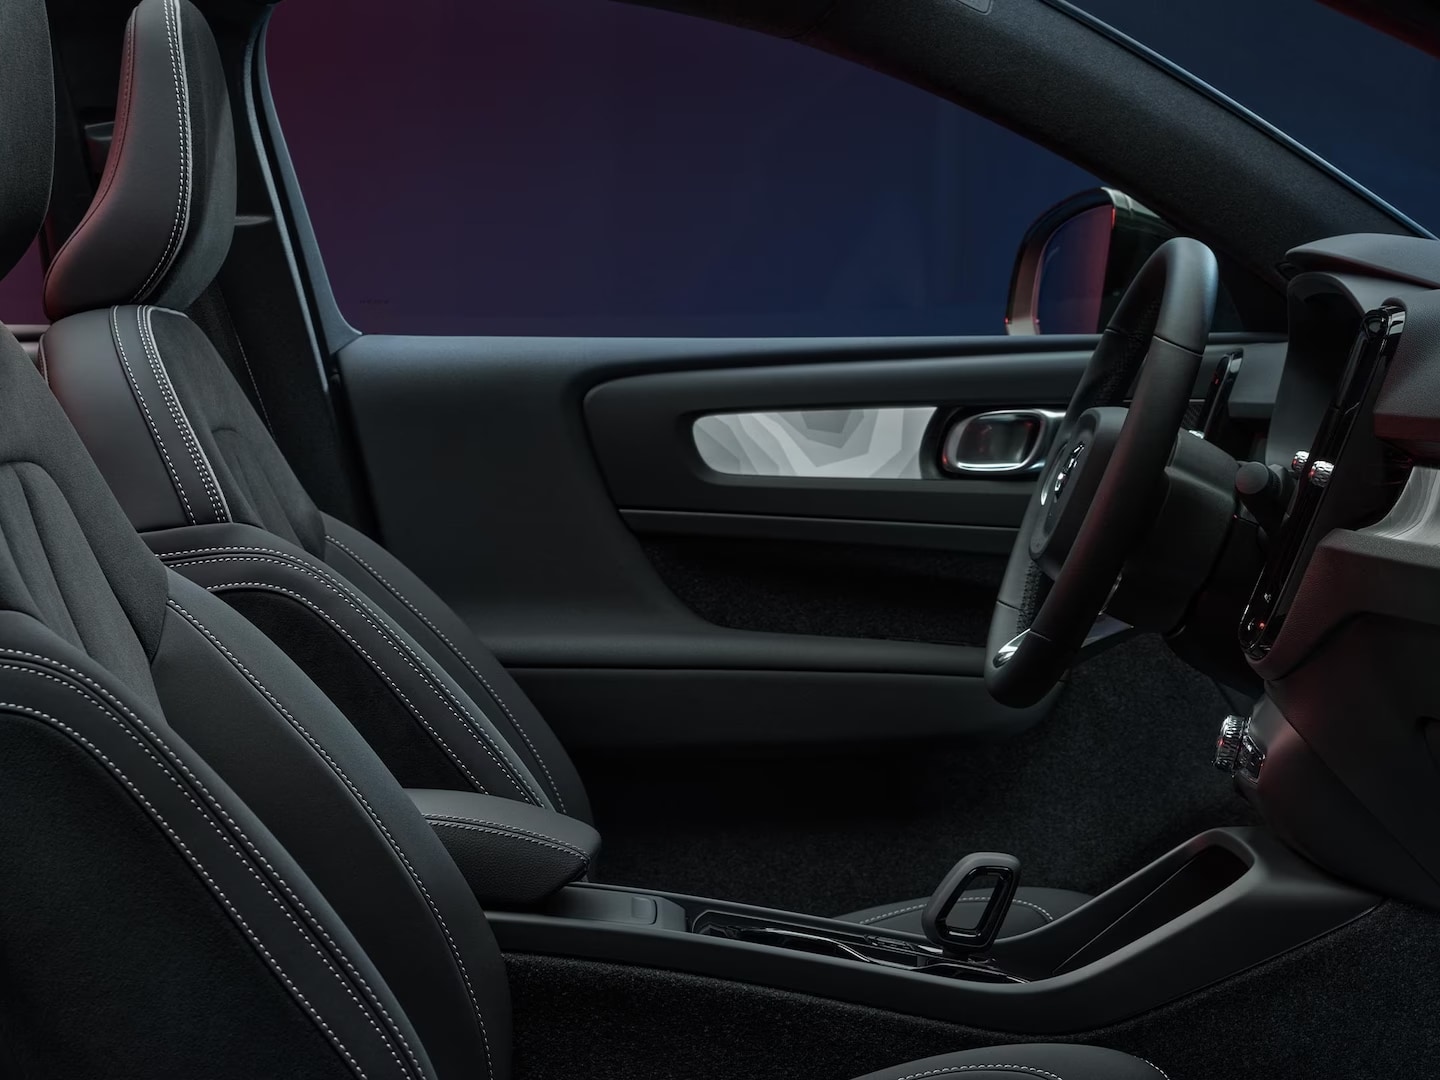 Ergonomically designed front seats of the Volvo C40 Recharge.